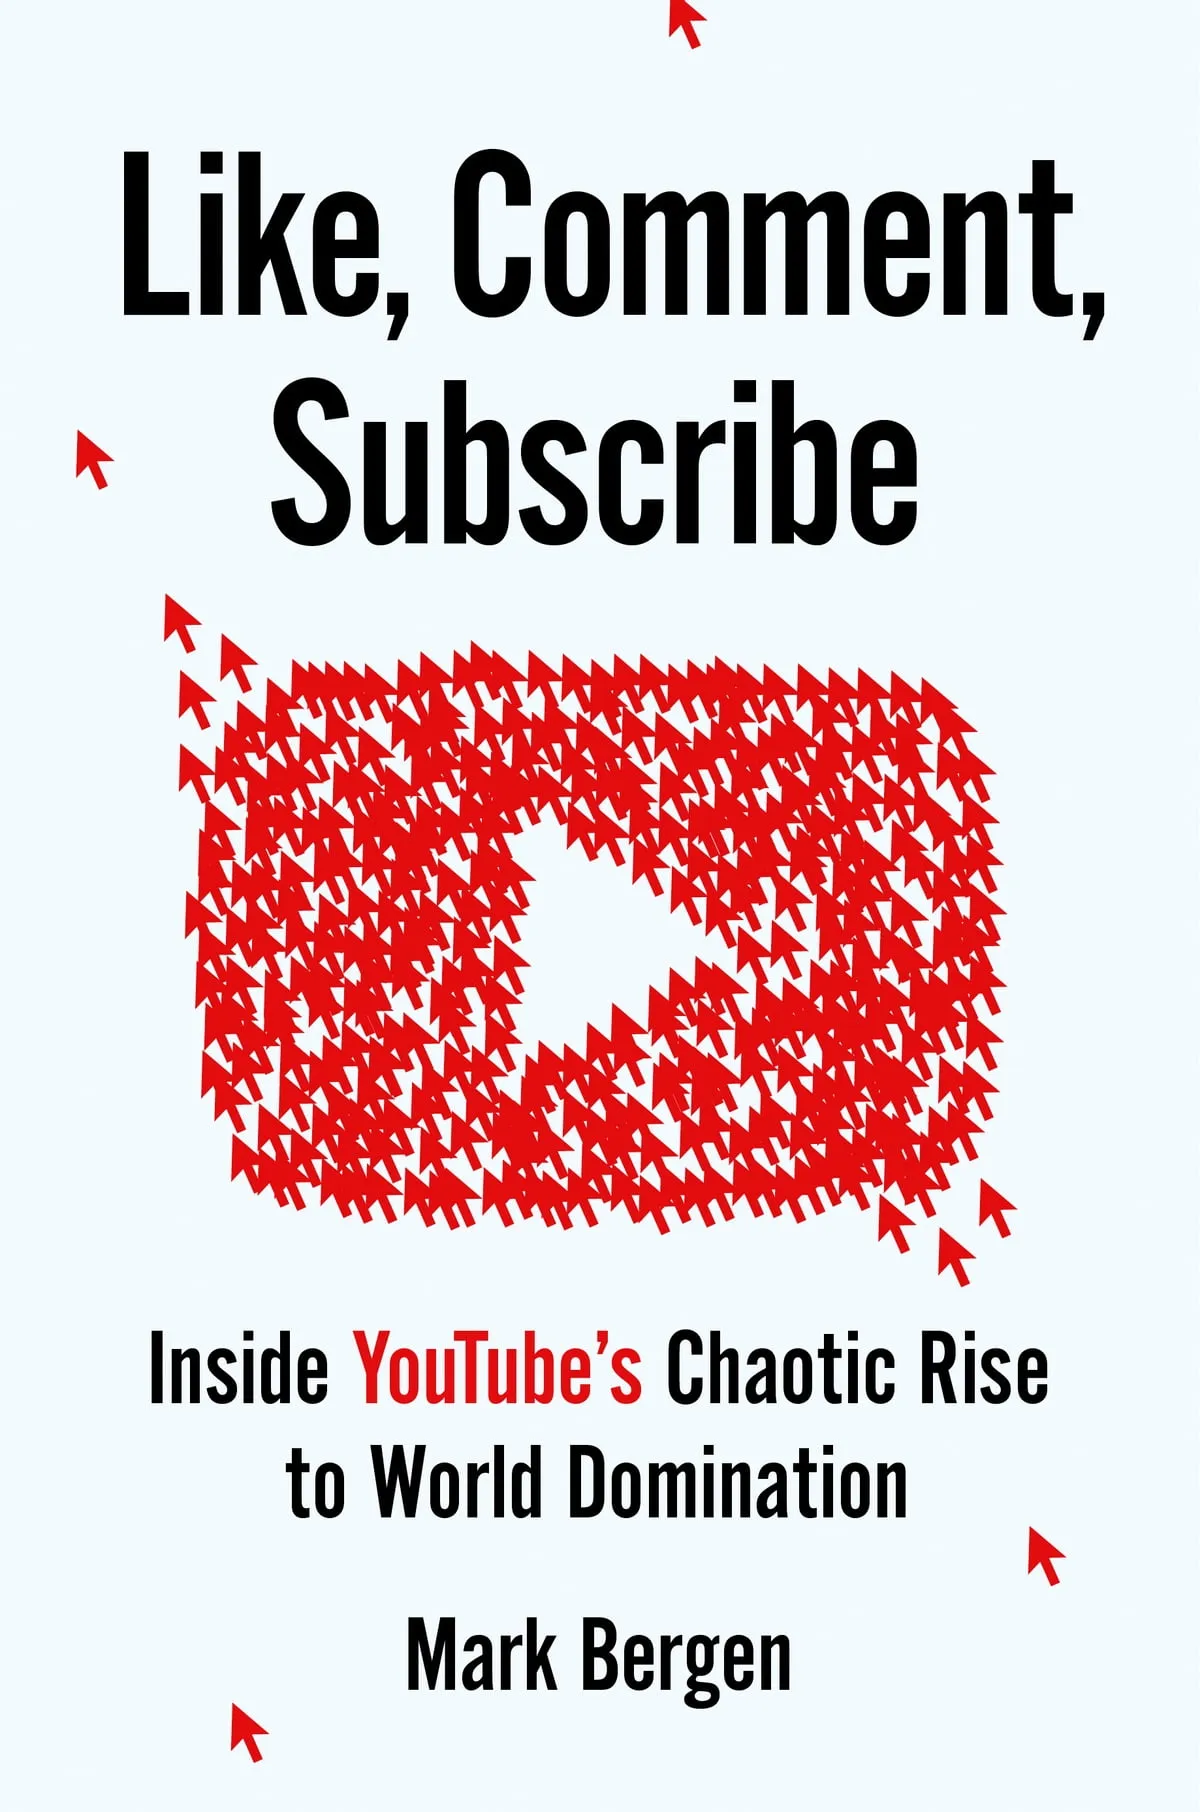 Cover of the book title Like, Comment, Subscribe